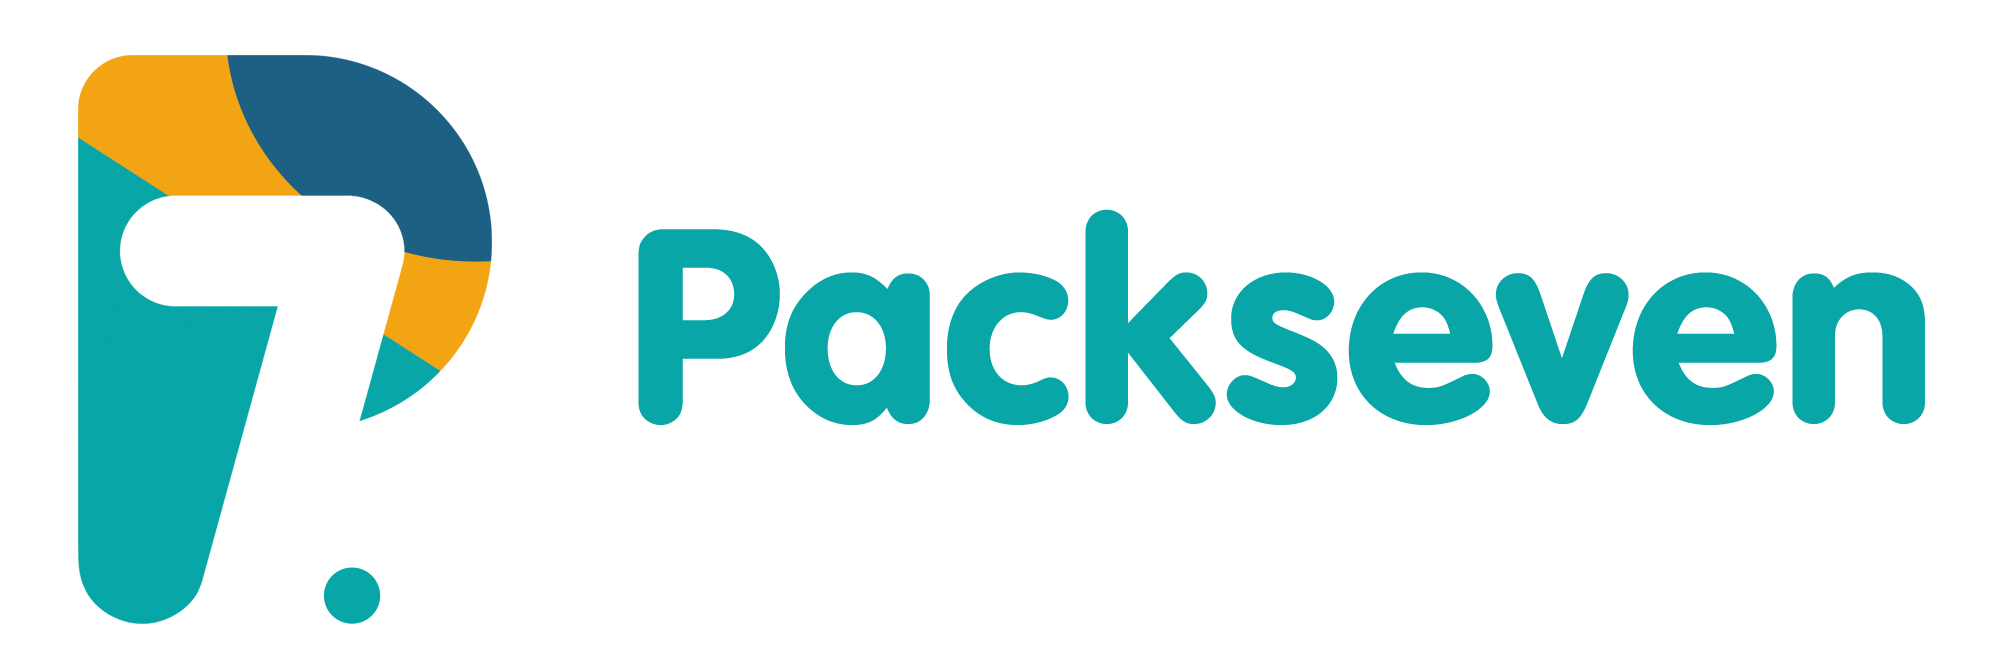 Packseven